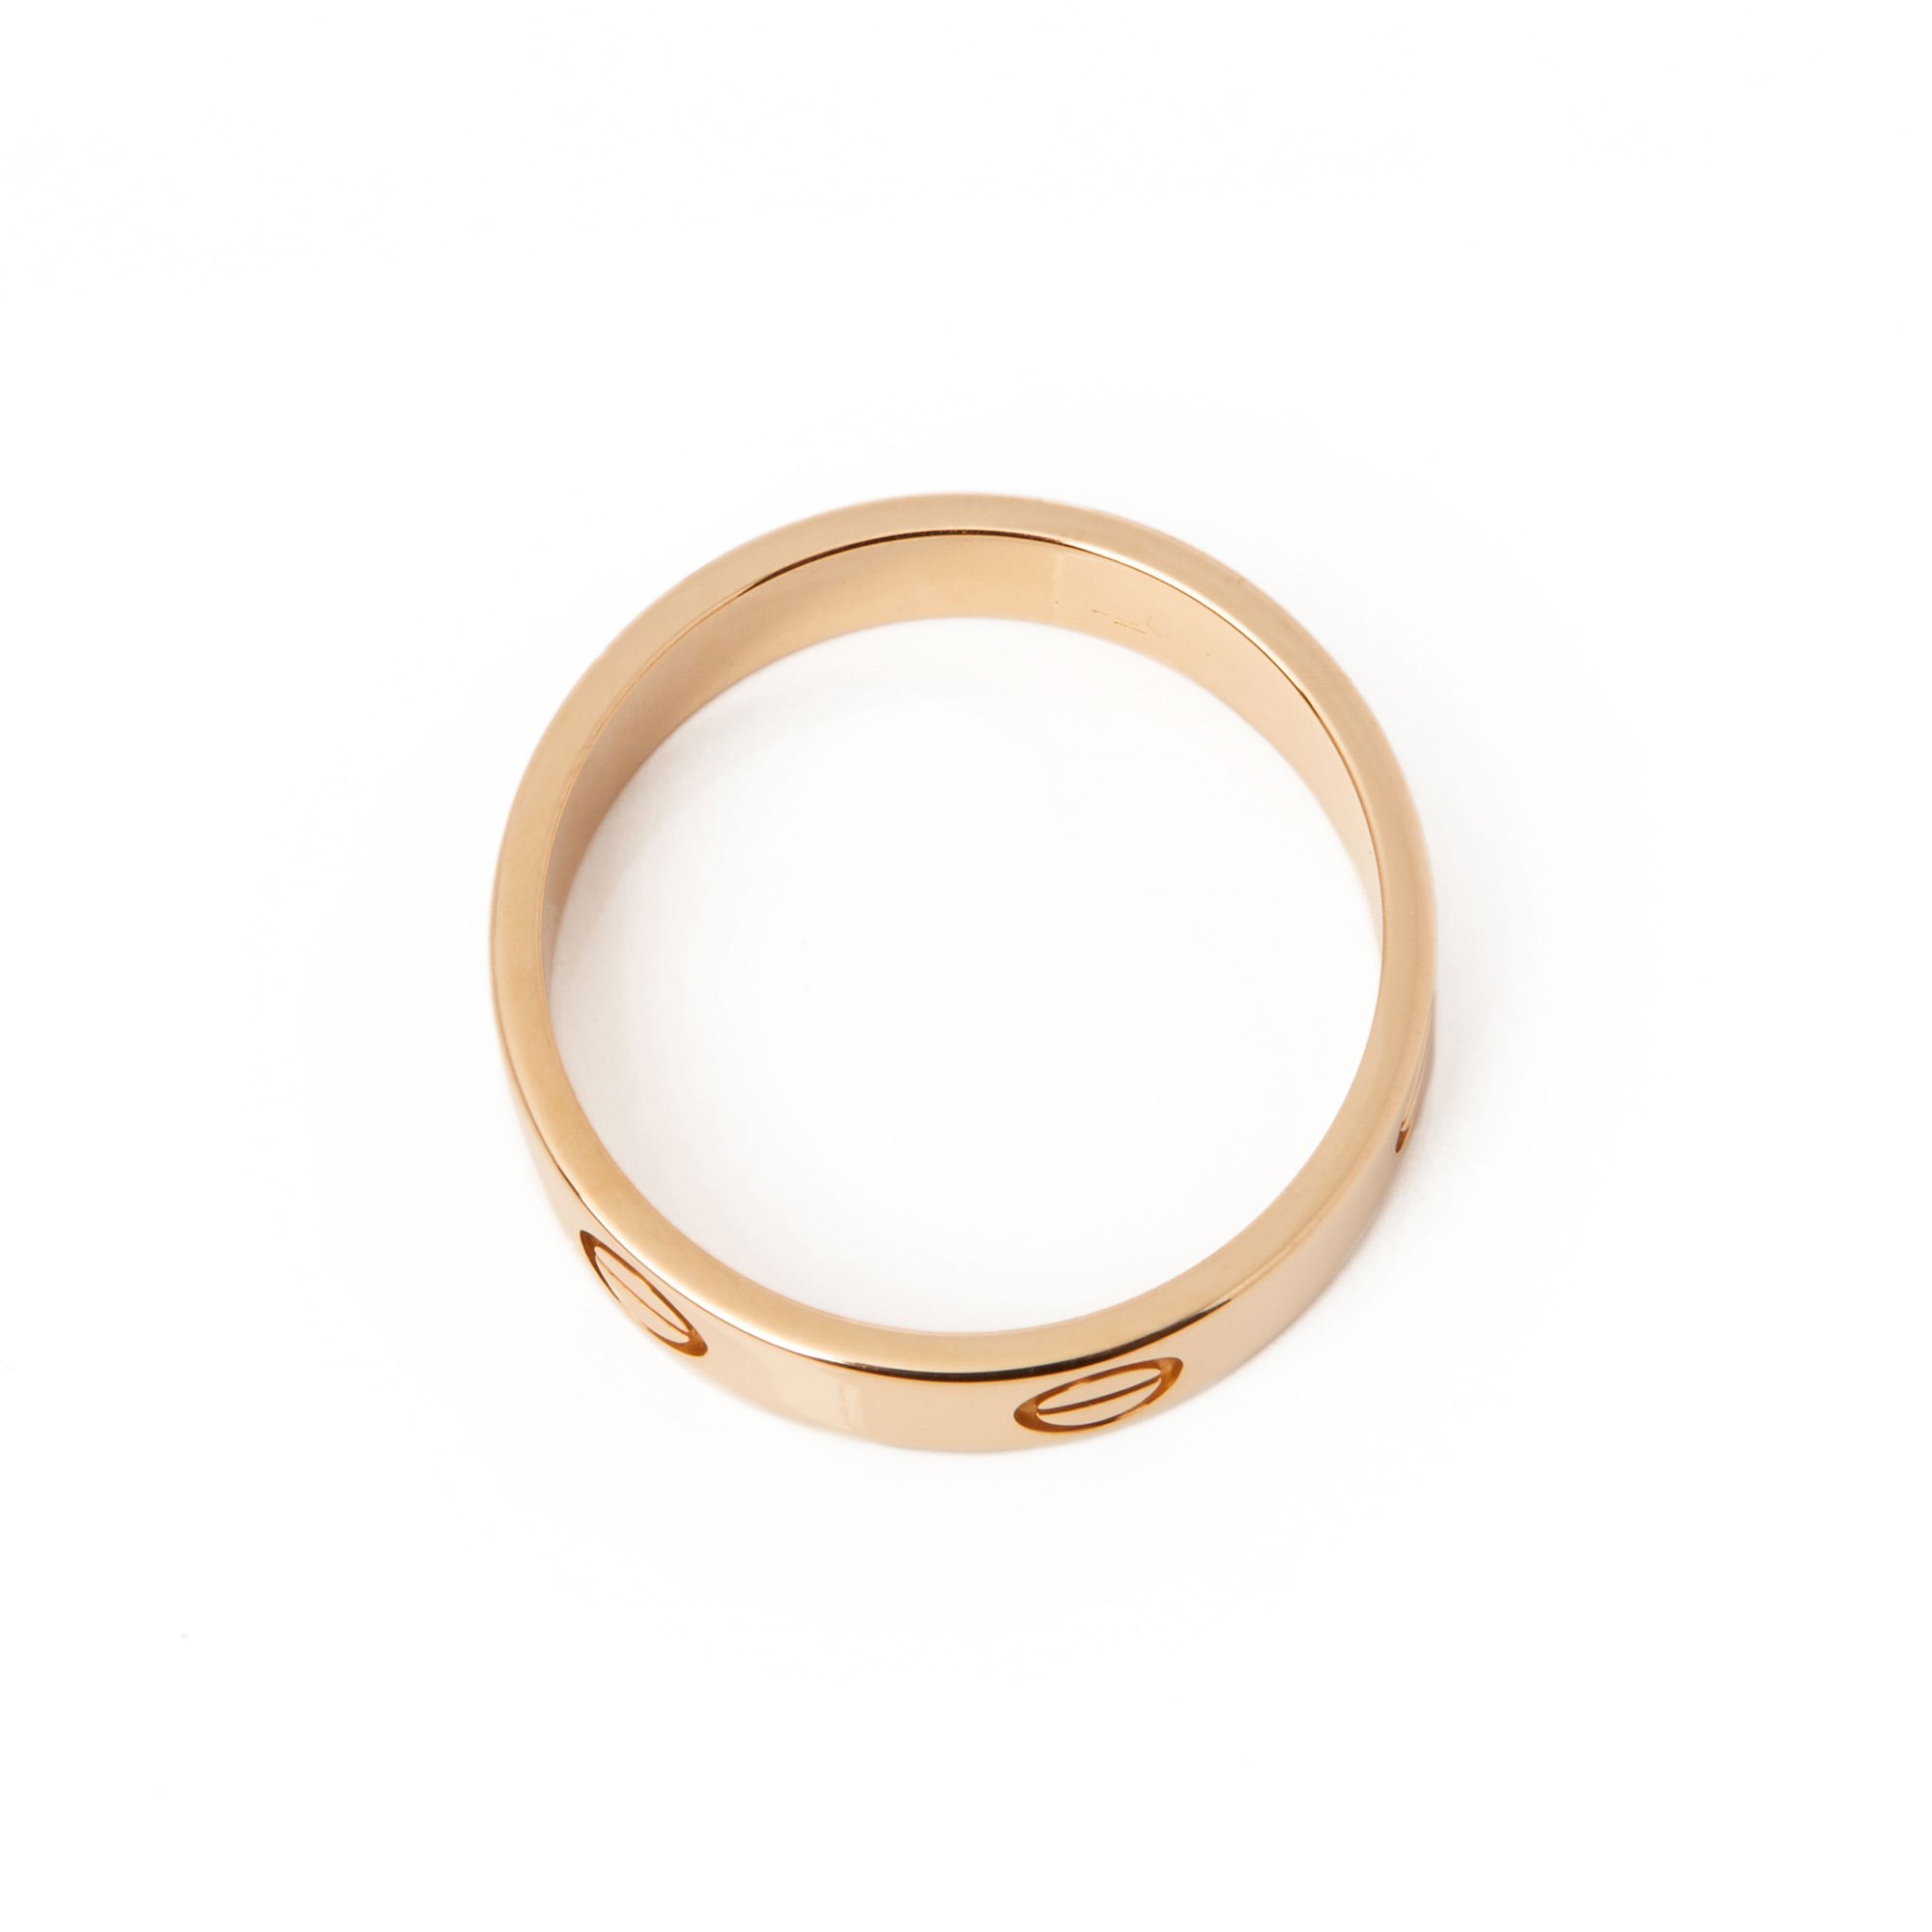 Cartier Love 18ct Yellow Gold Band Ring